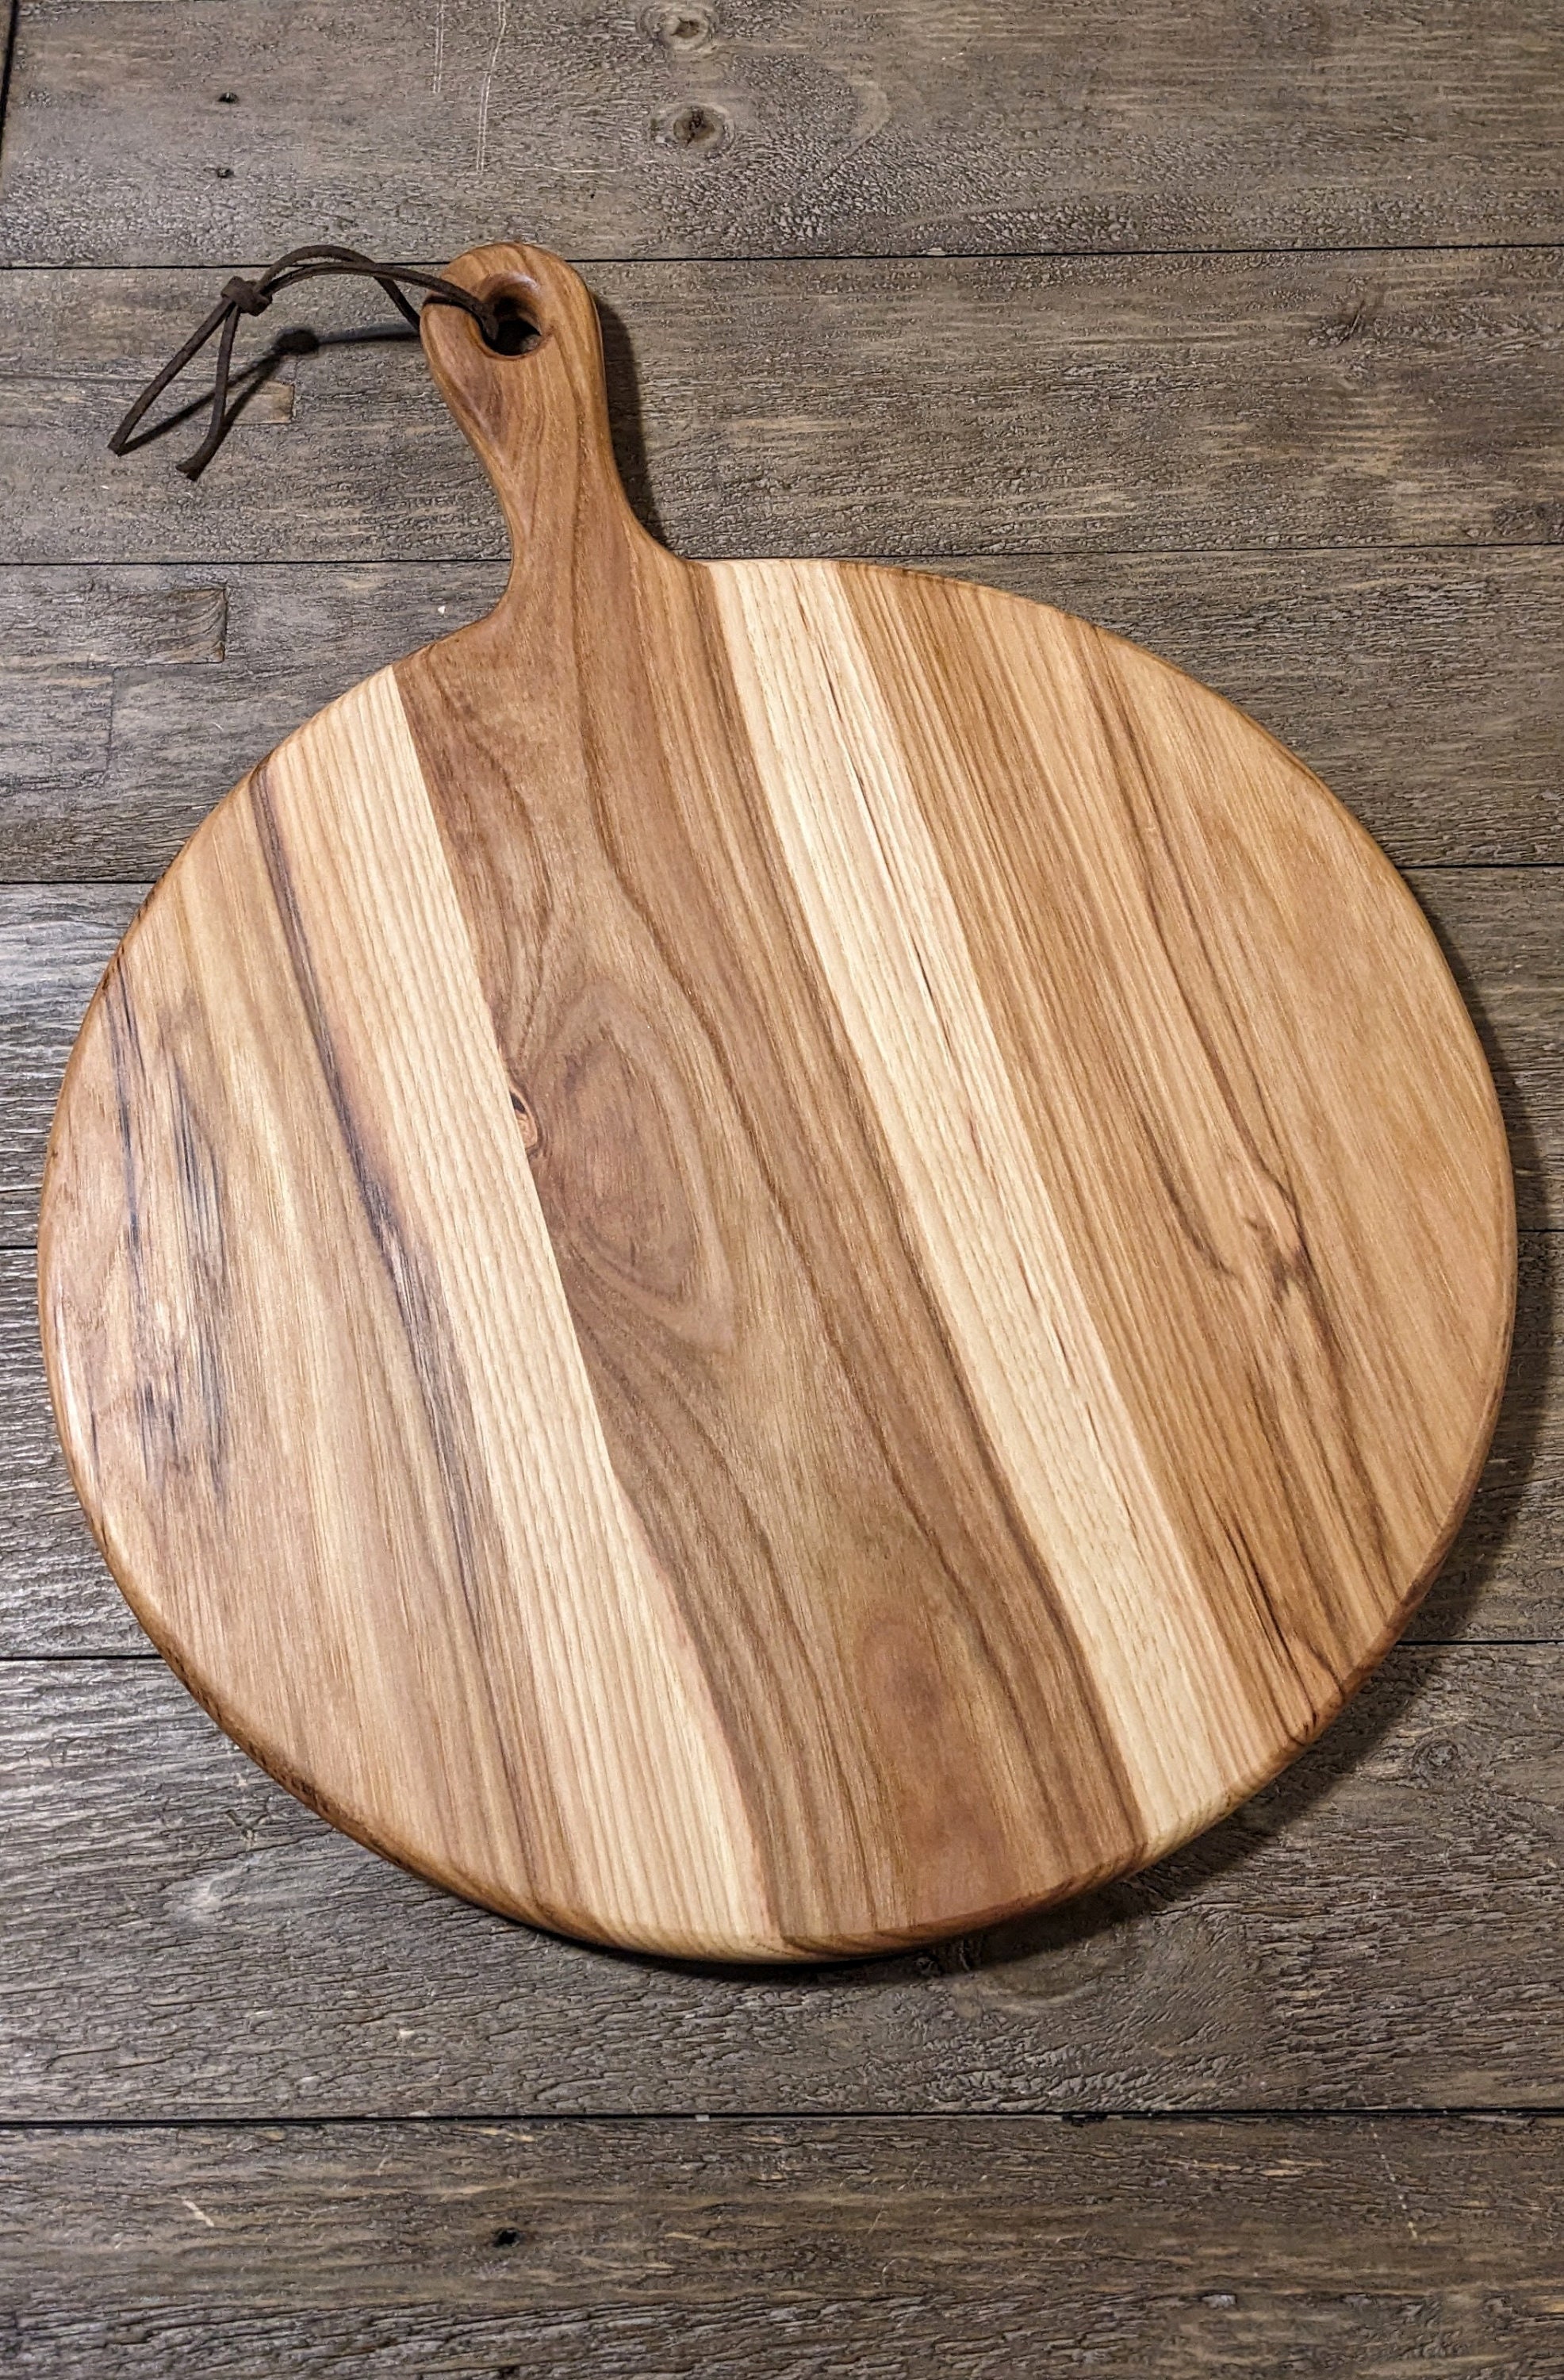 Wooden Cutting Board 16 inch, Pack of 4 Charcuterie Board, Large Round Wooden Cutting Board with Handle, Home Decor, by Woodpeckers